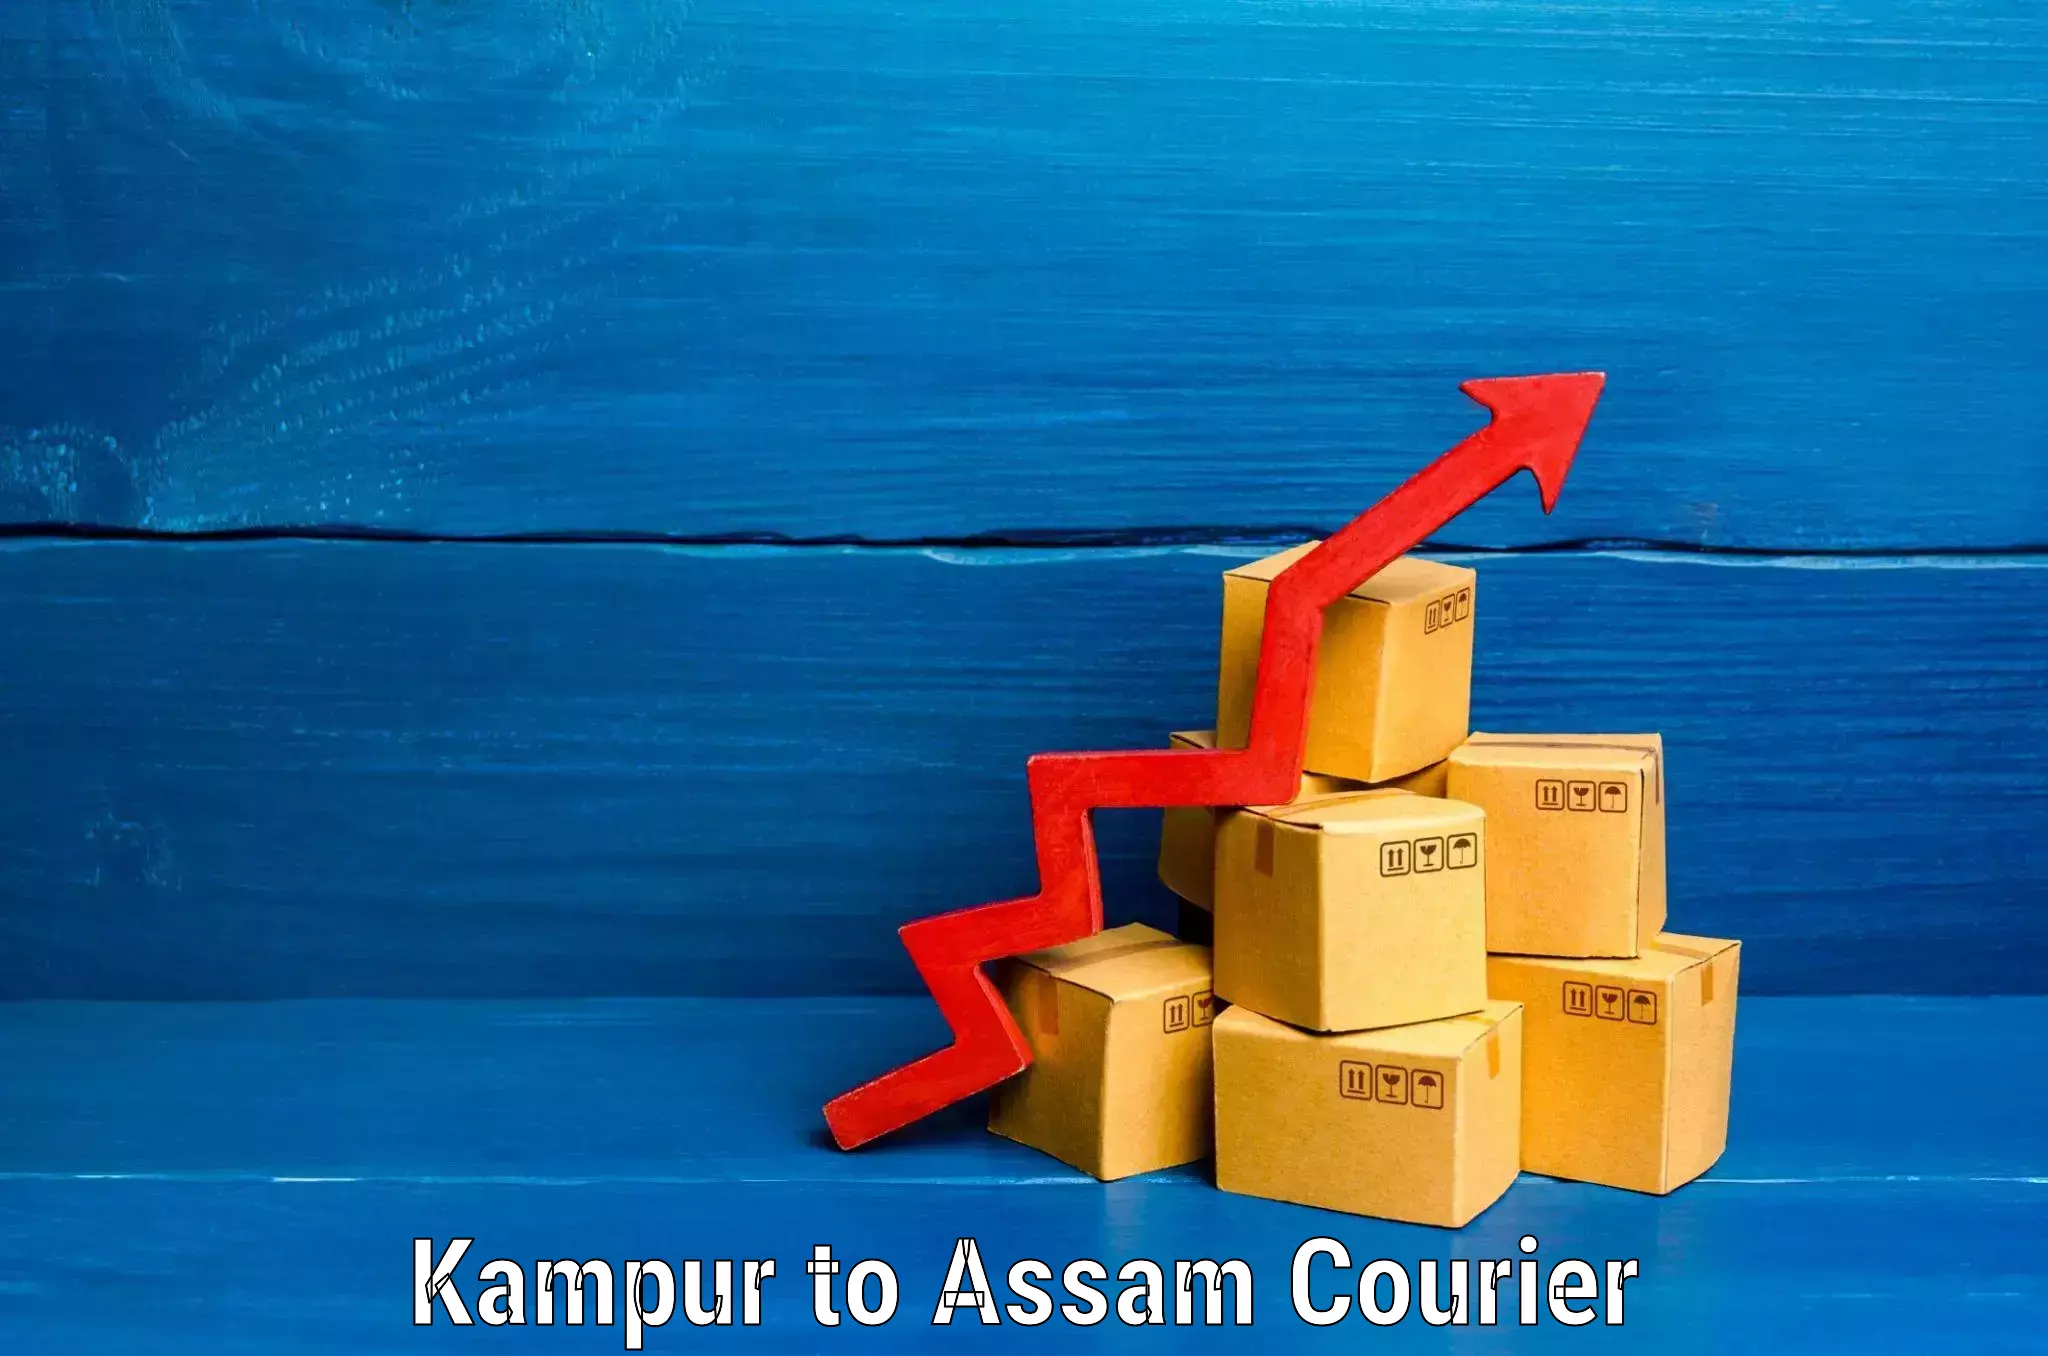 Luggage transport service Kampur to Assam